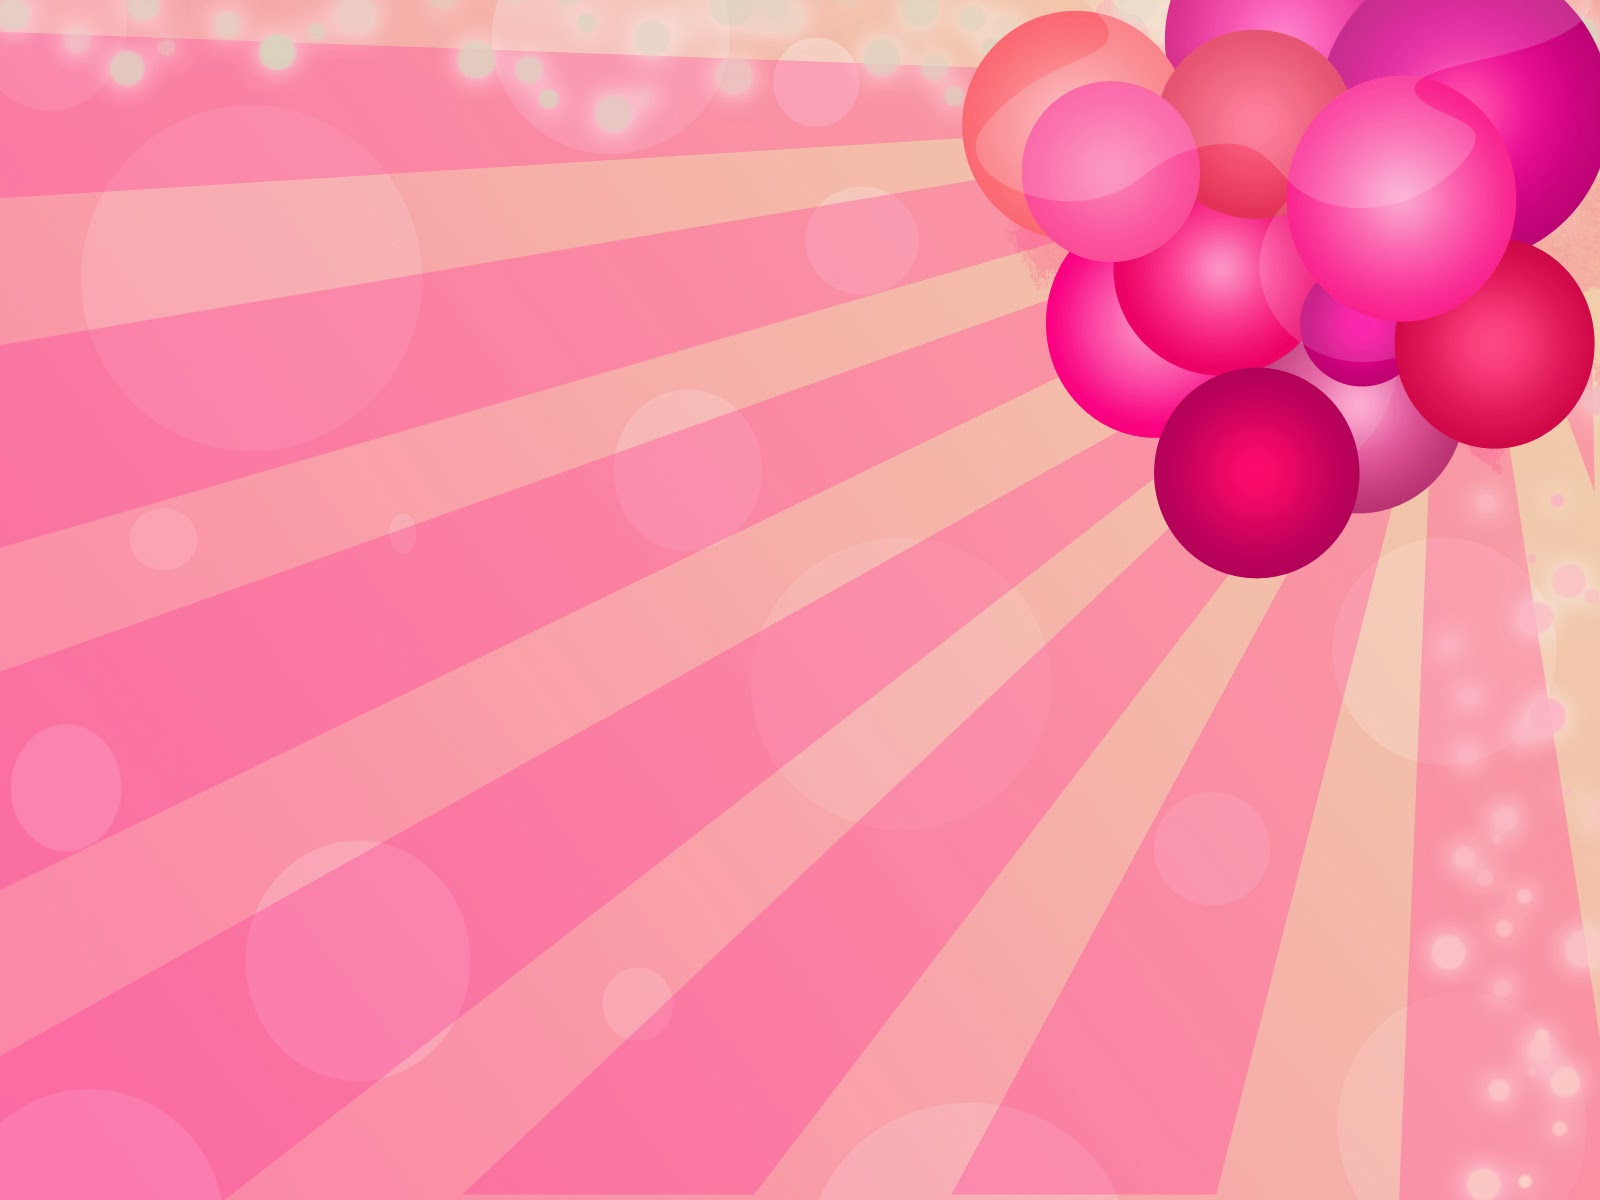 PINK HD WALLPAPERS | FREE HD WALLPAPERS